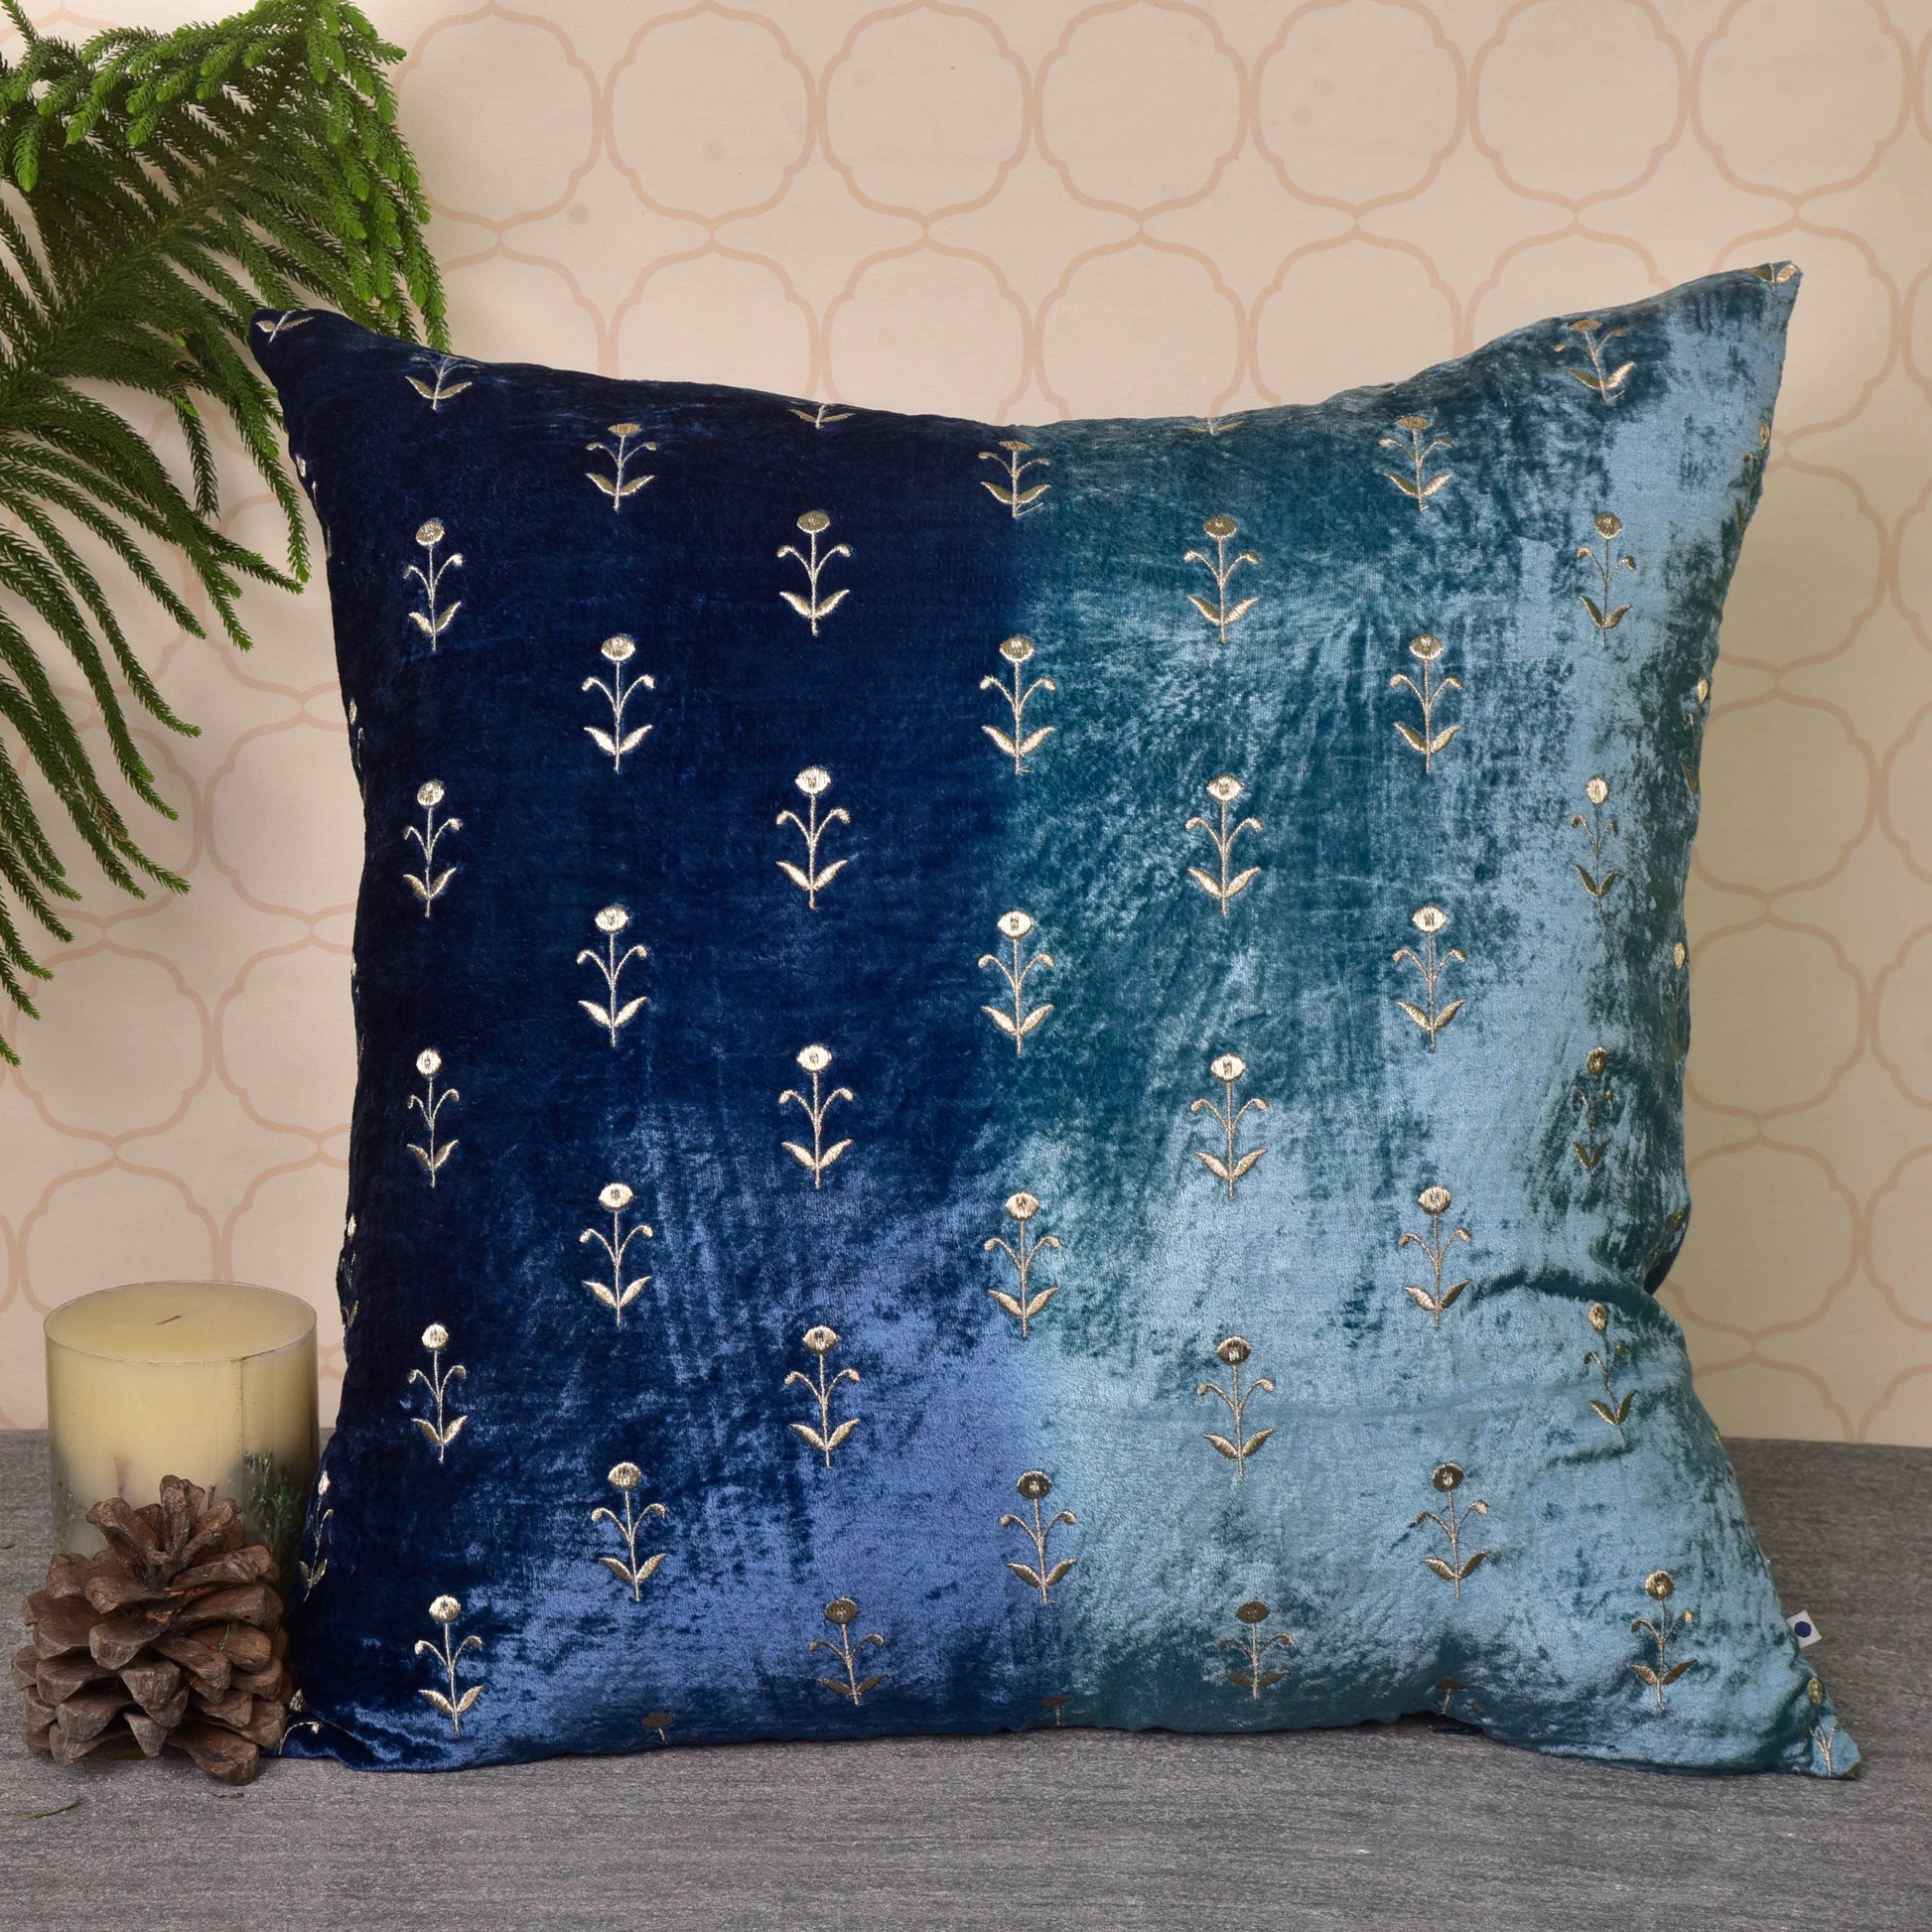 Ombre Cushion Cover